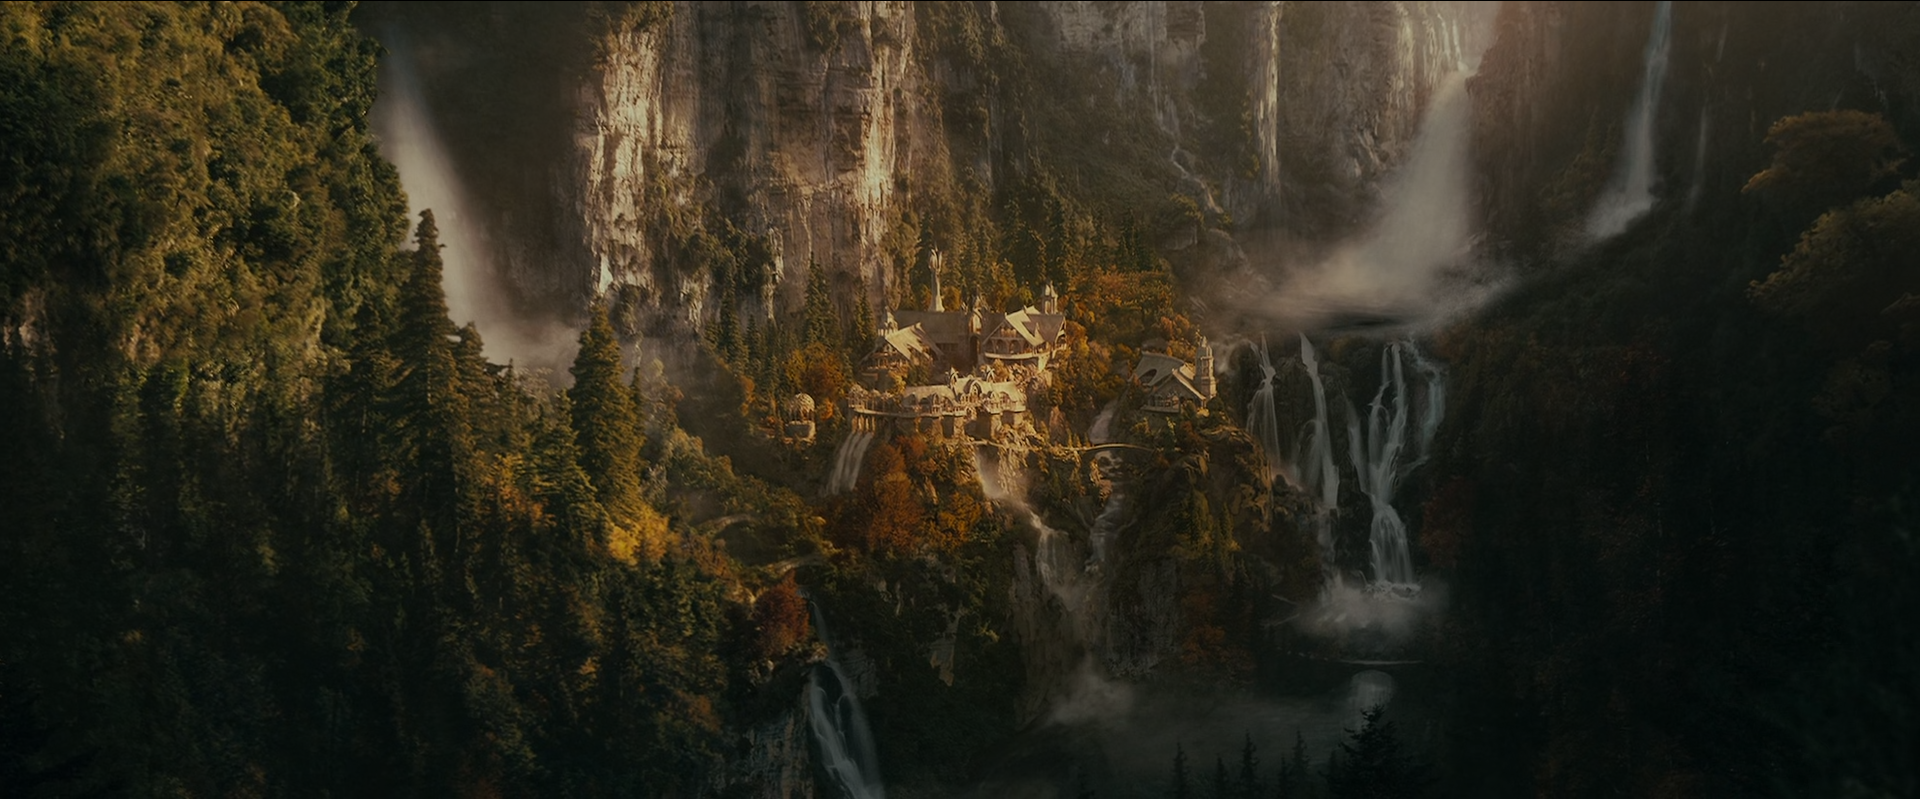 rivendell 3.png